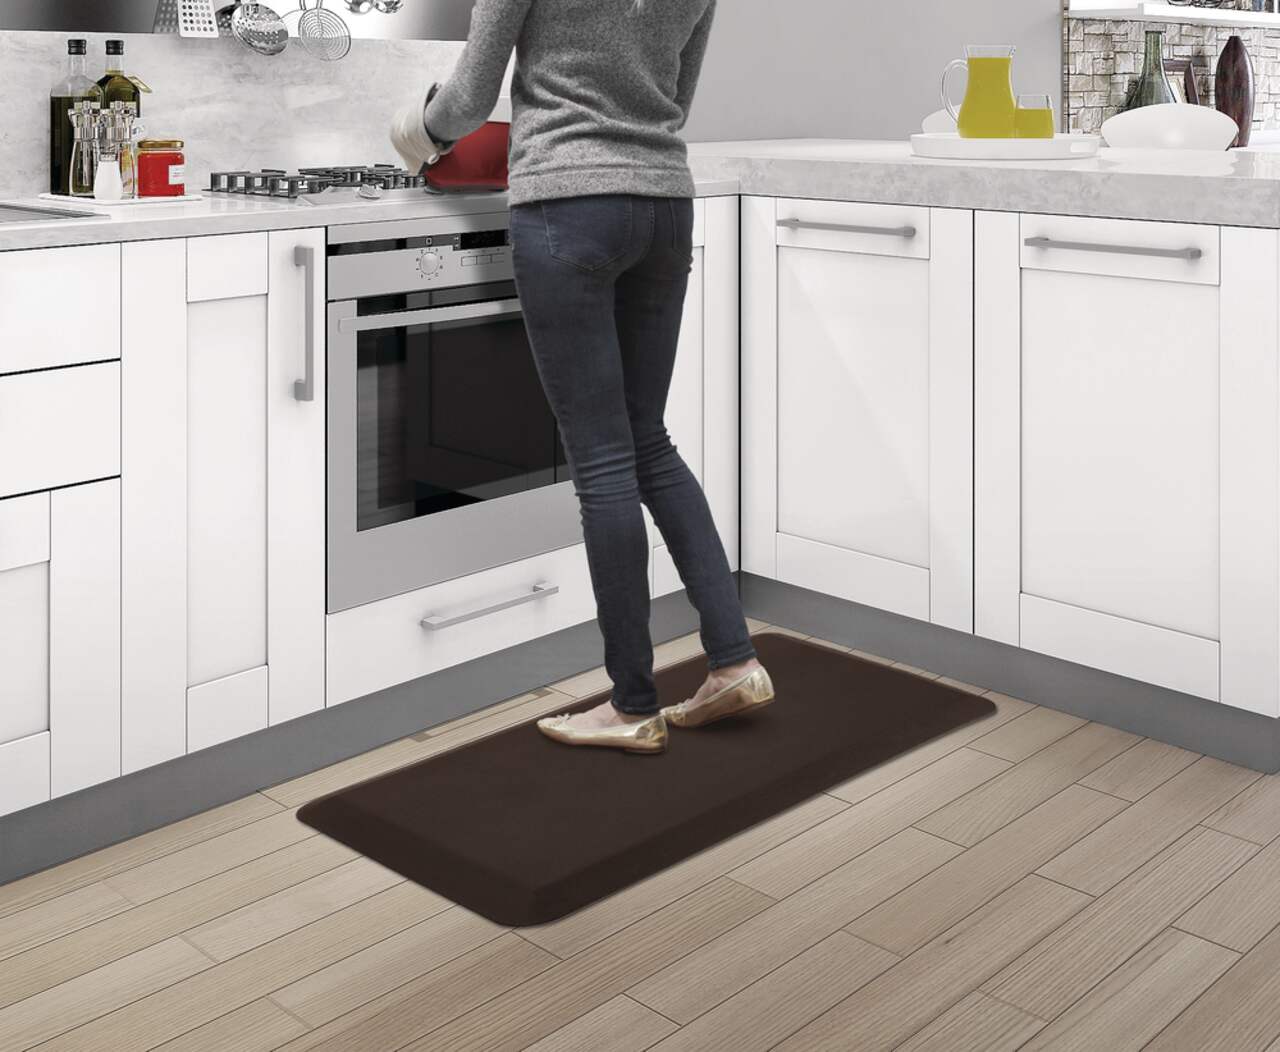 https://media-www.canadiantire.ca/product/living/home-decor/floor-window-decor/0687130/anti-fatigue-kitchen-mat-20x38-7068b5a4-051e-482b-8fdf-04bfe8126cc2.png?imdensity=1&imwidth=1244&impolicy=mZoom